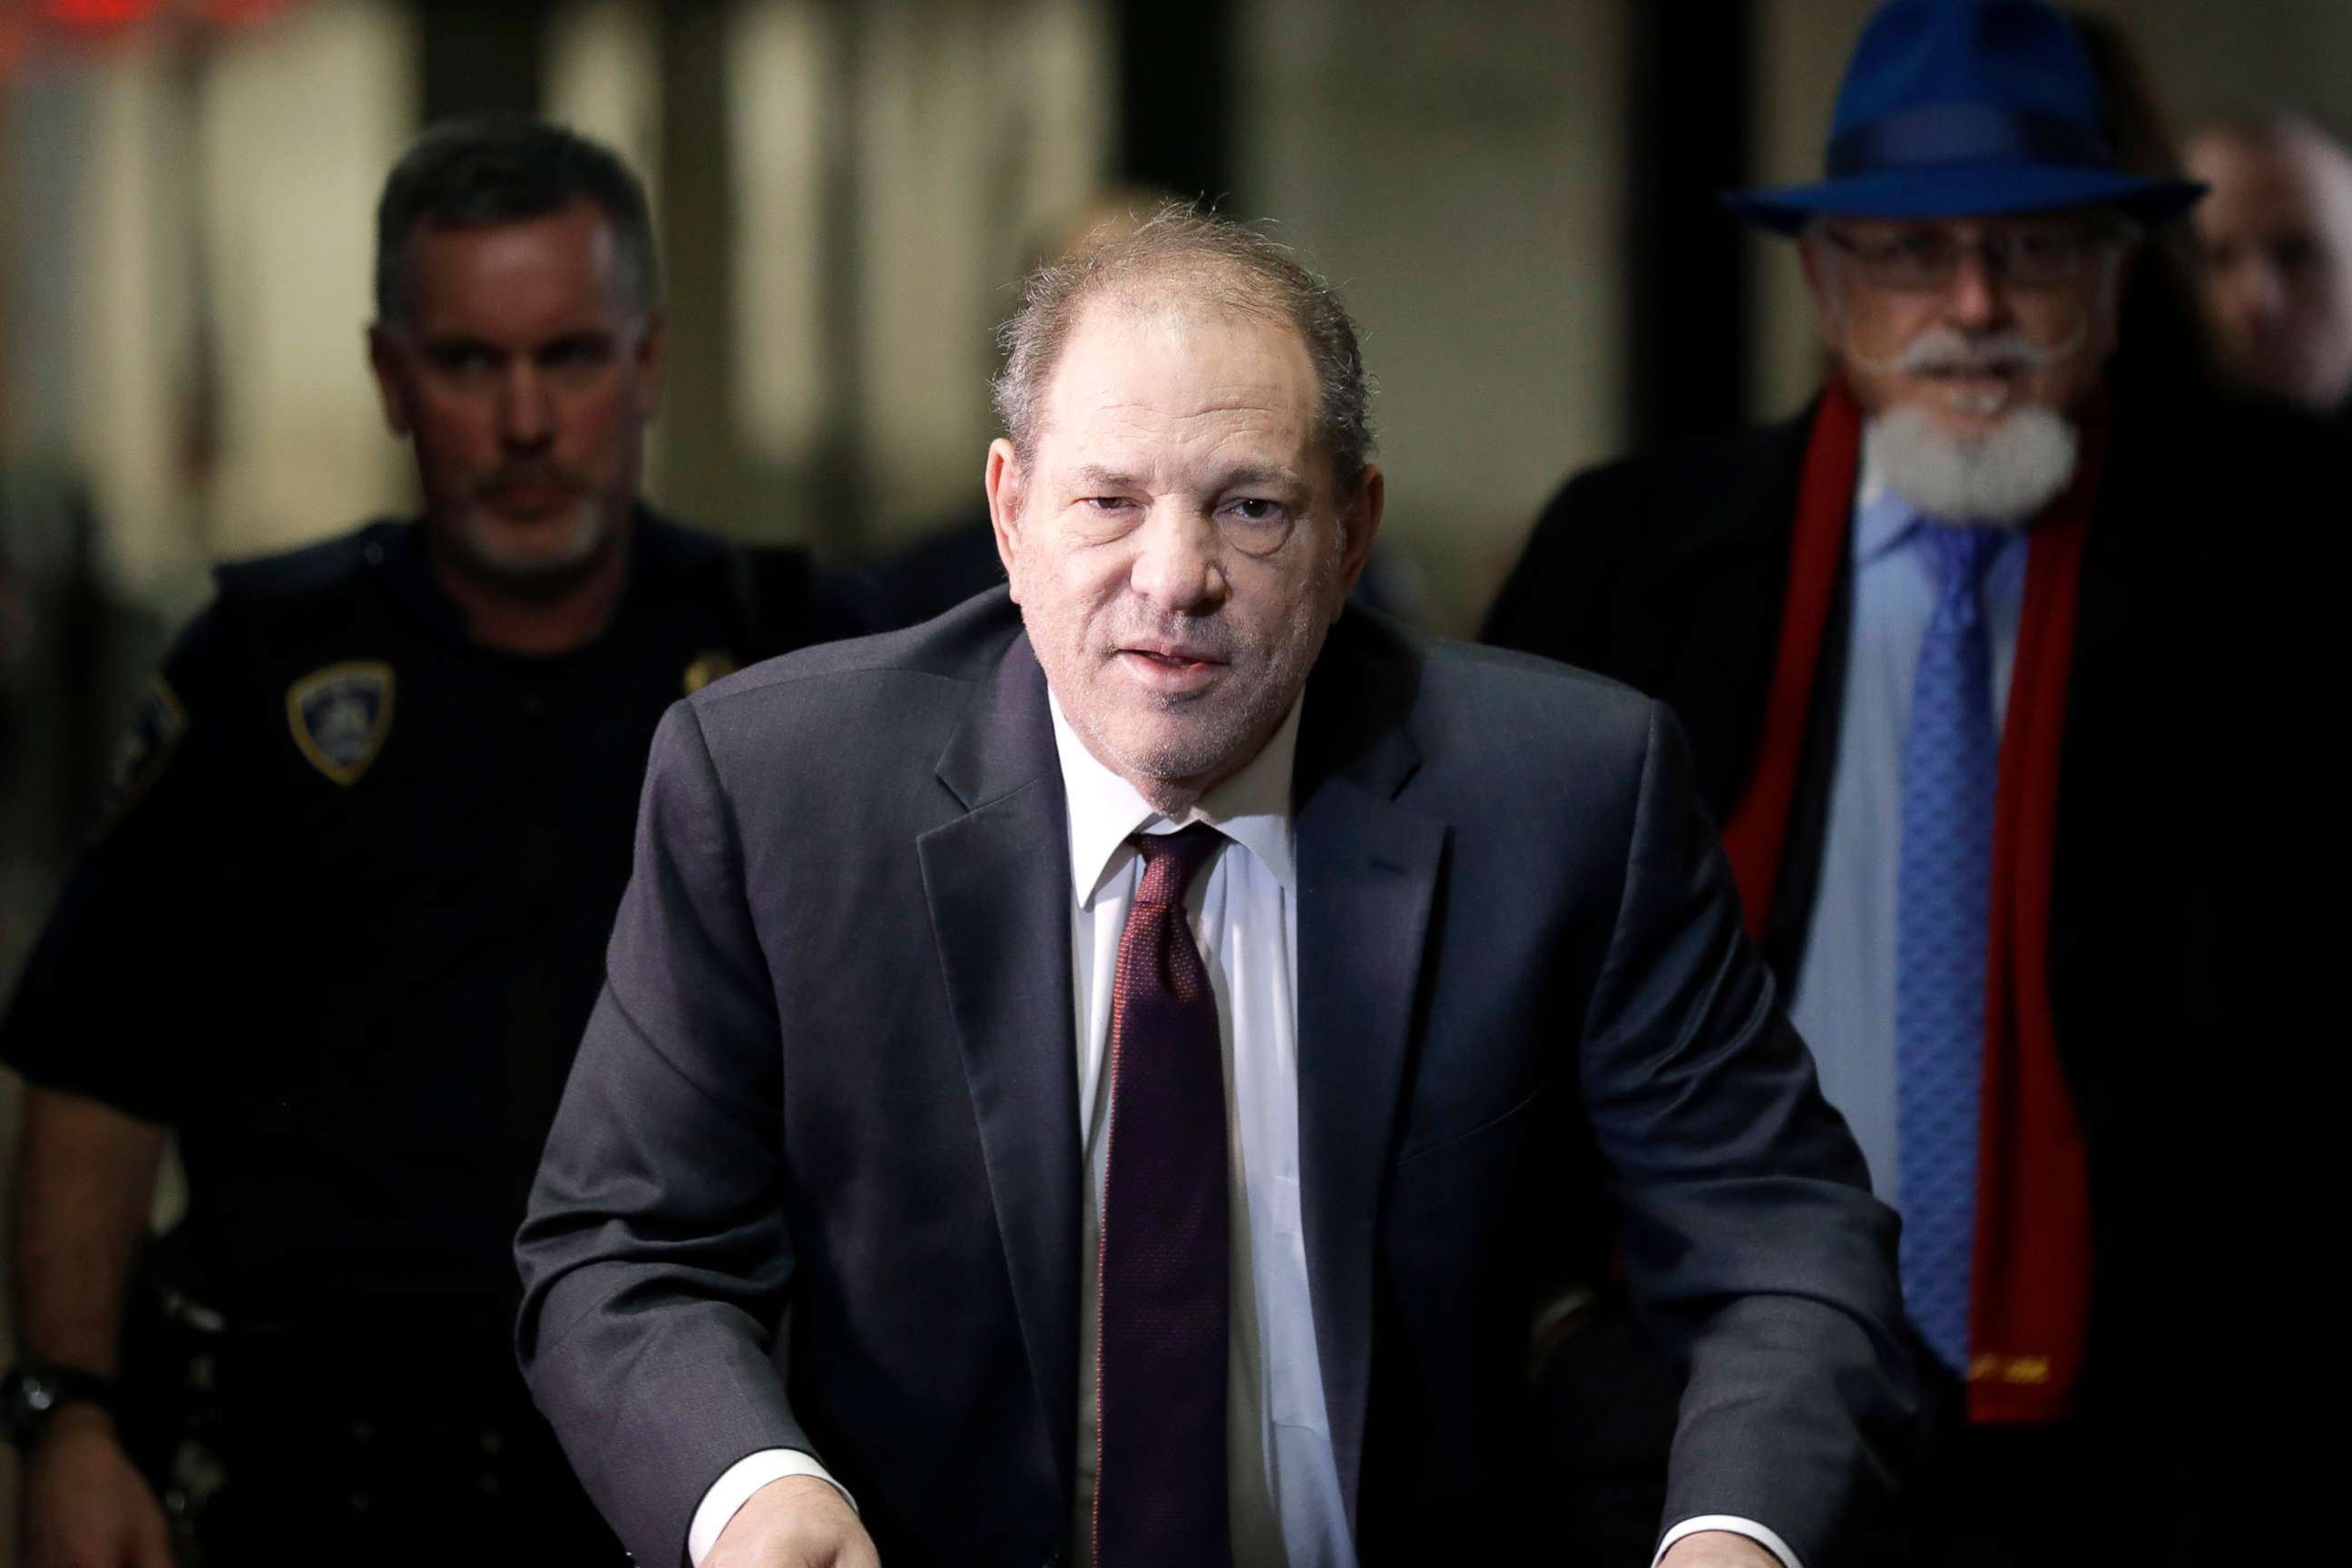 PHOTO: Harvey Weinstein arrives at a Manhattan courthouse for his rape trial in New York, Feb. 20, 2020.